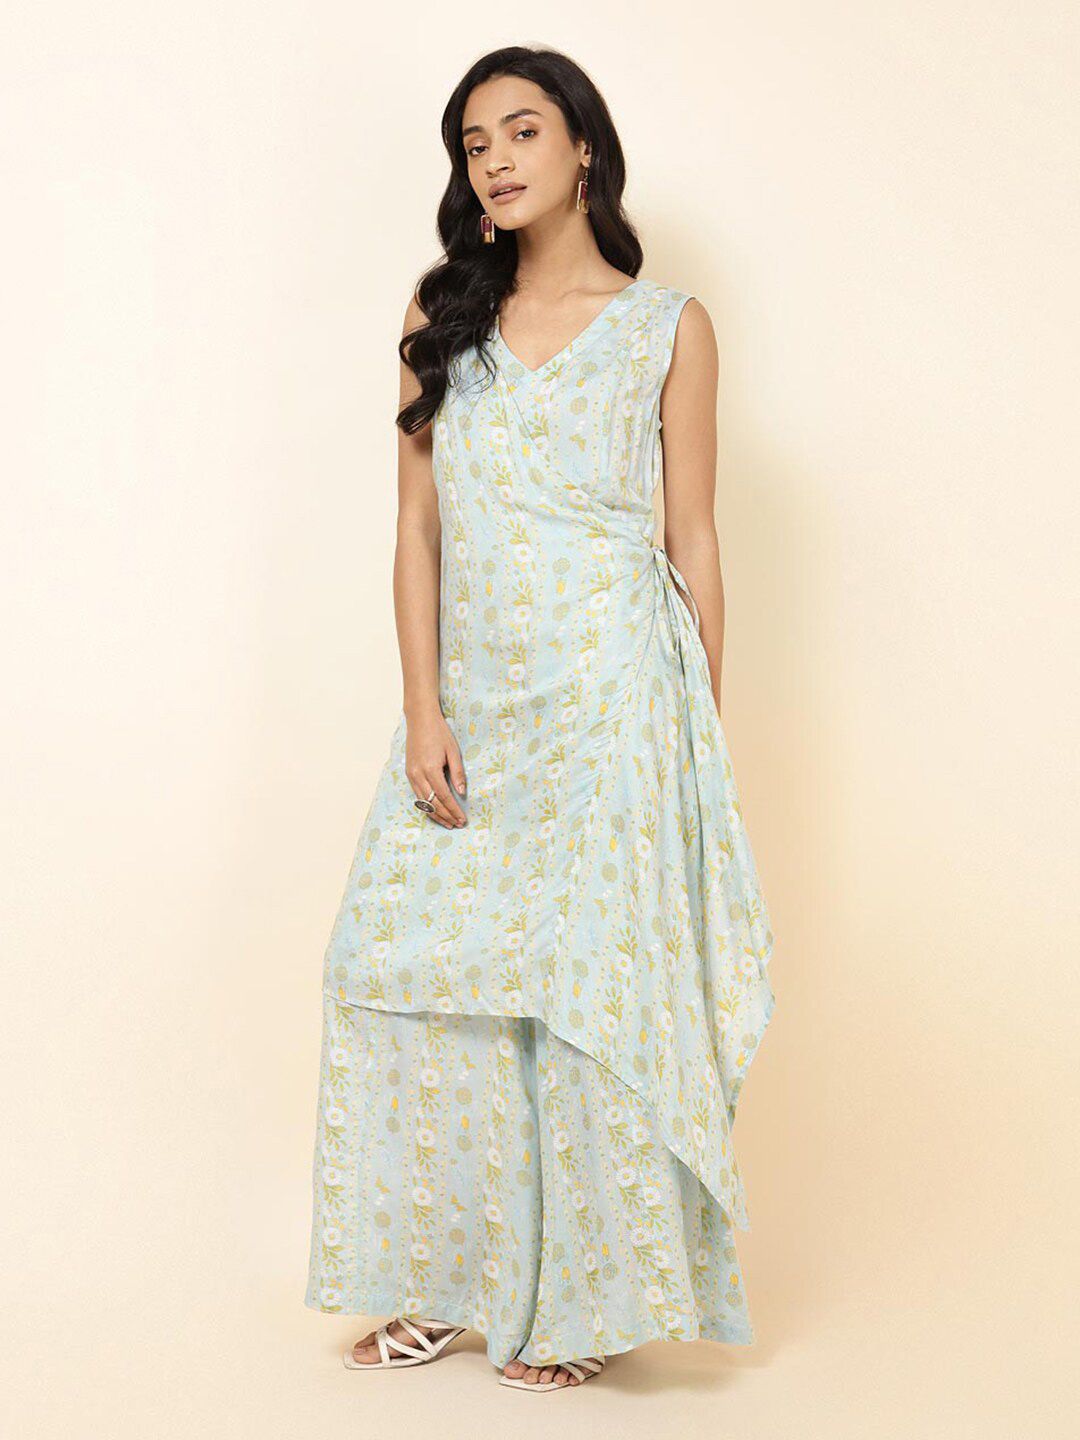 Fabindia Blue Floral Printed Basic Ethnic Jumpsuit Price in India